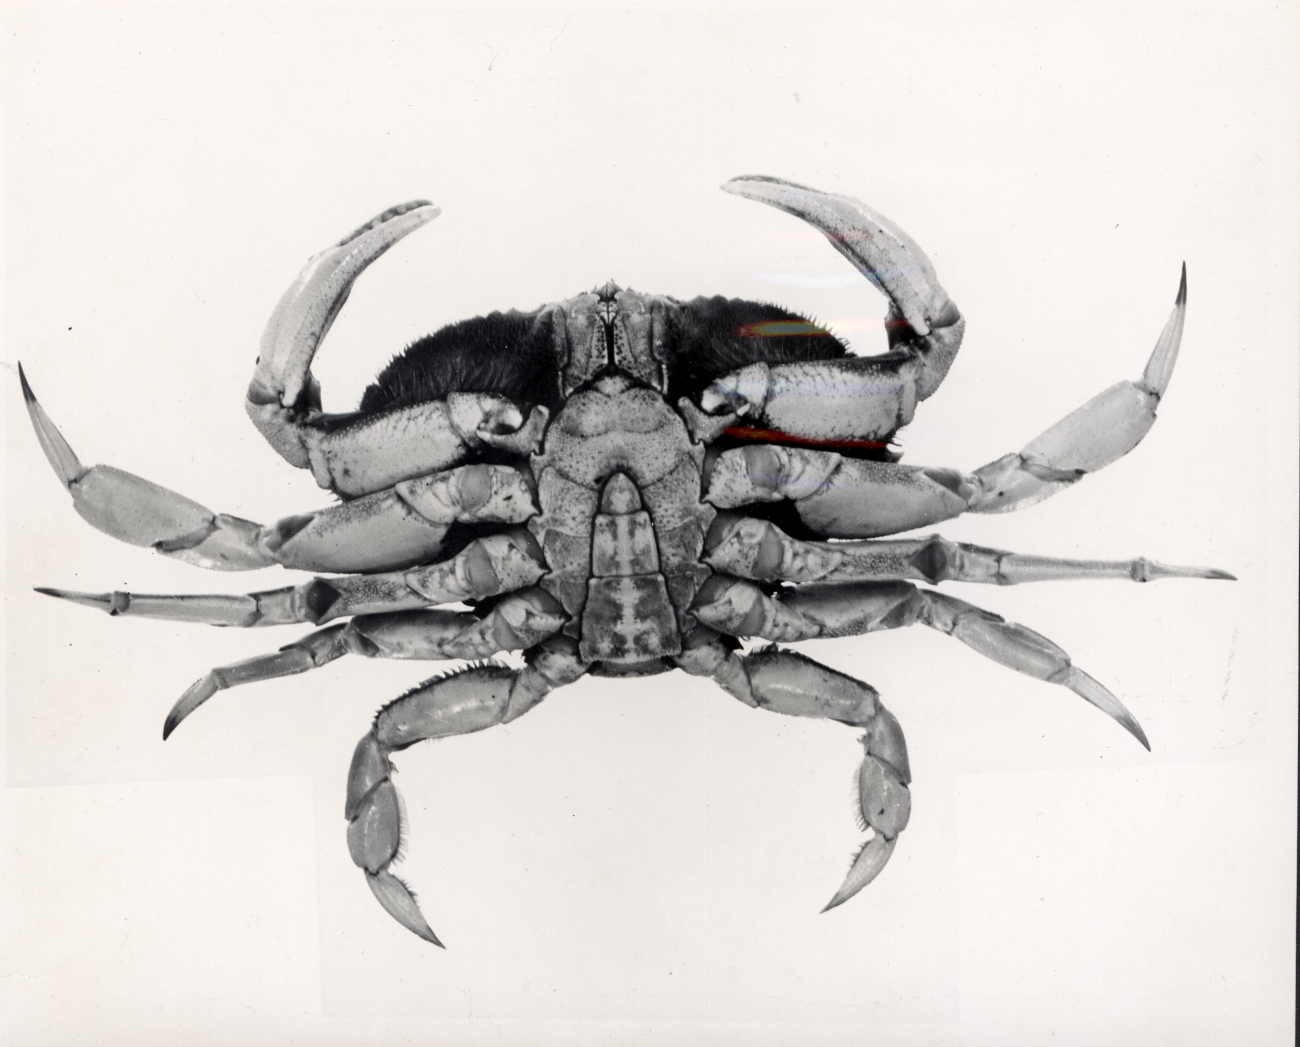 Male dungeness crab (Cancer magister)